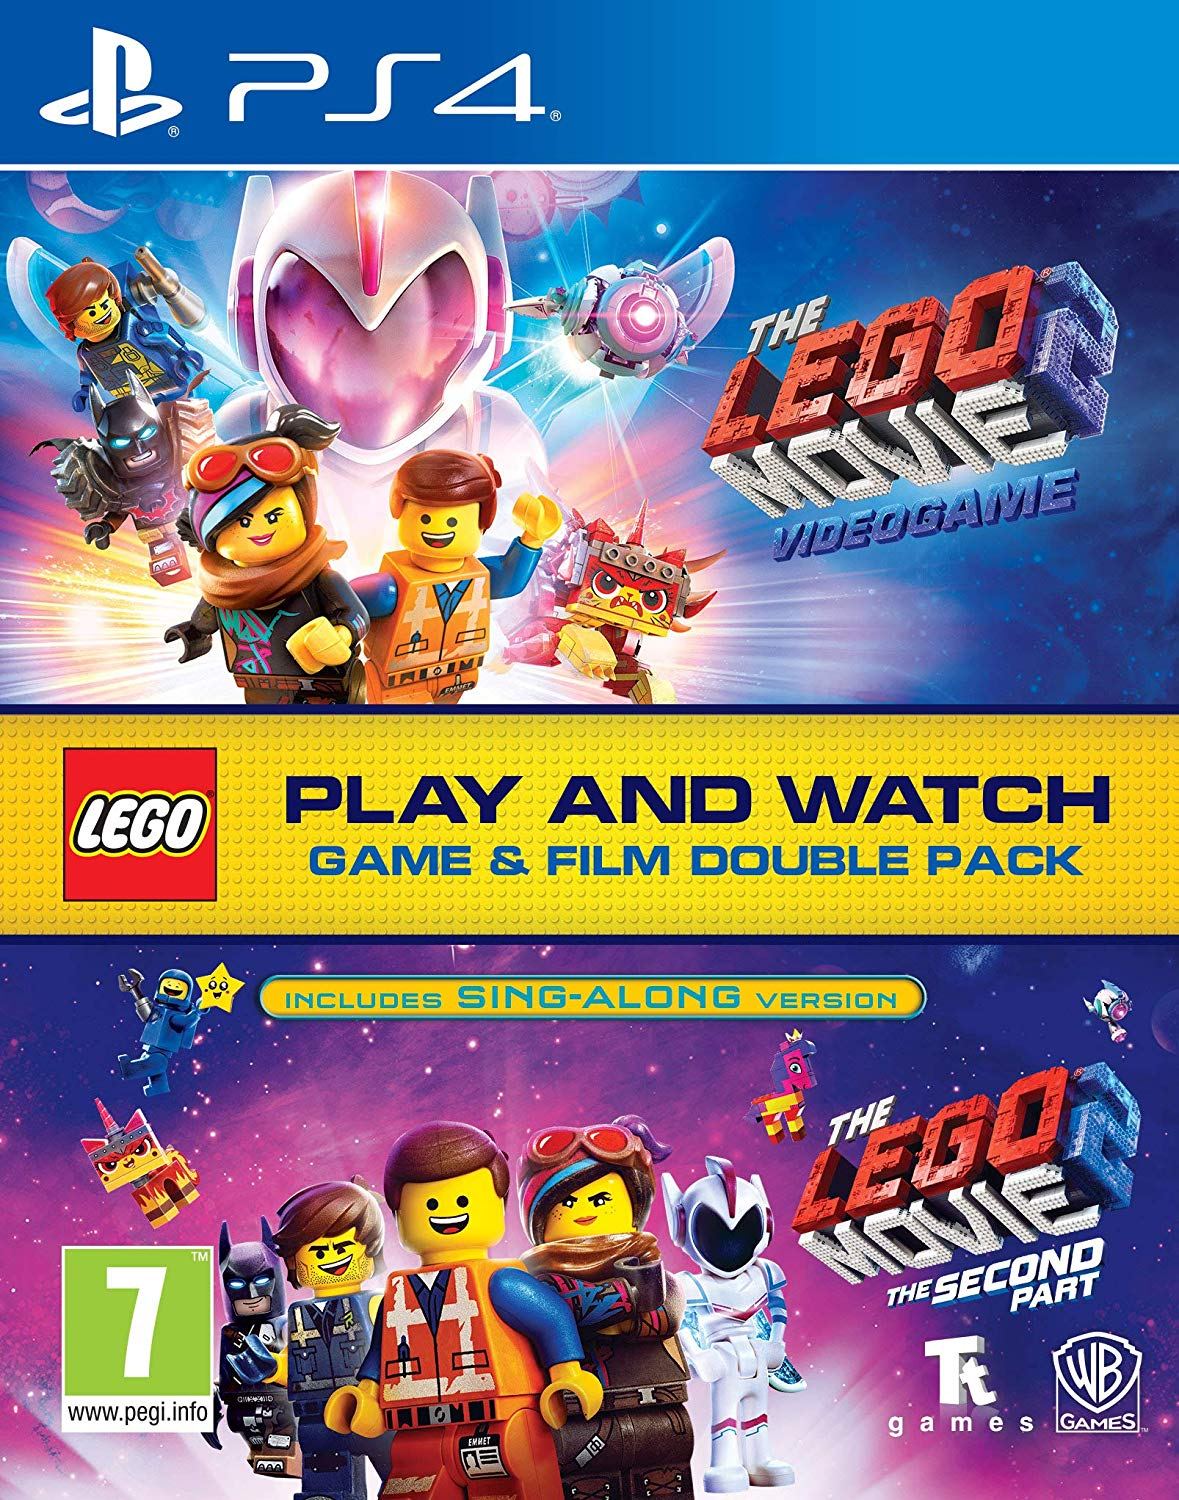 Lego 2 Game & Film Double Pack for